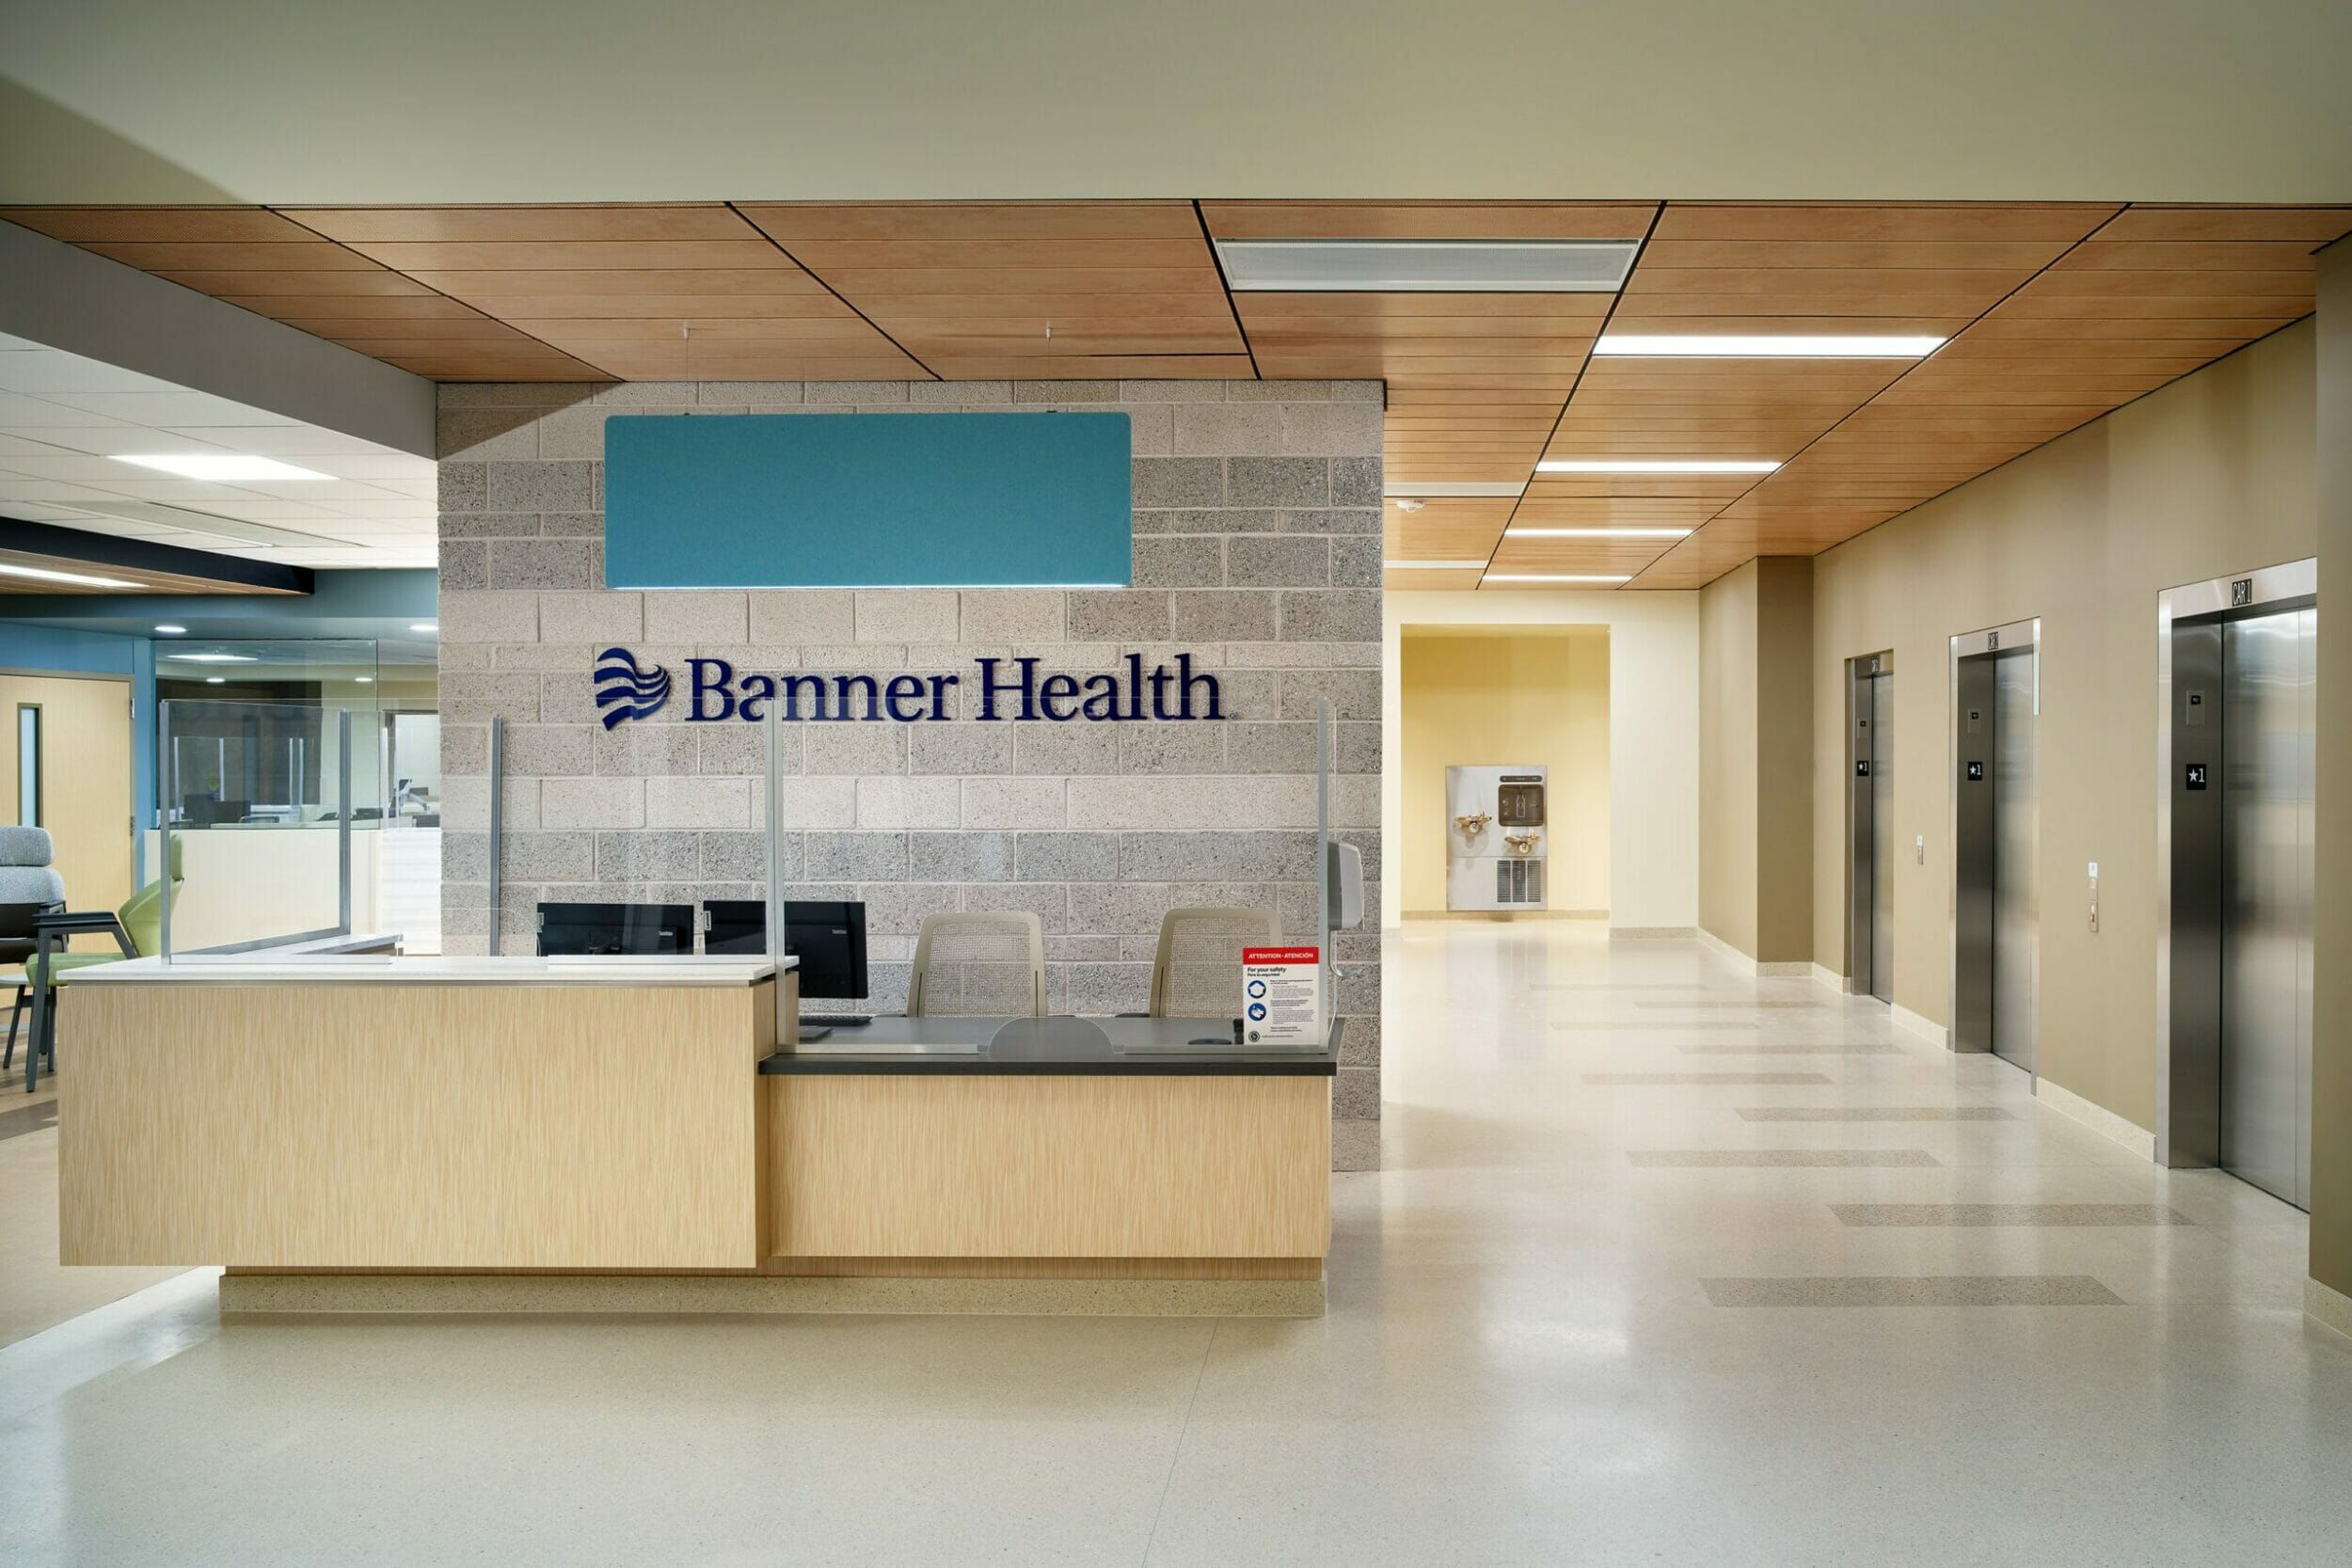 The front desk at Banner Health Center plus with gray stone background behind the desk with the Banner Health logo and name on it, with a light tan desk and wood ceilings